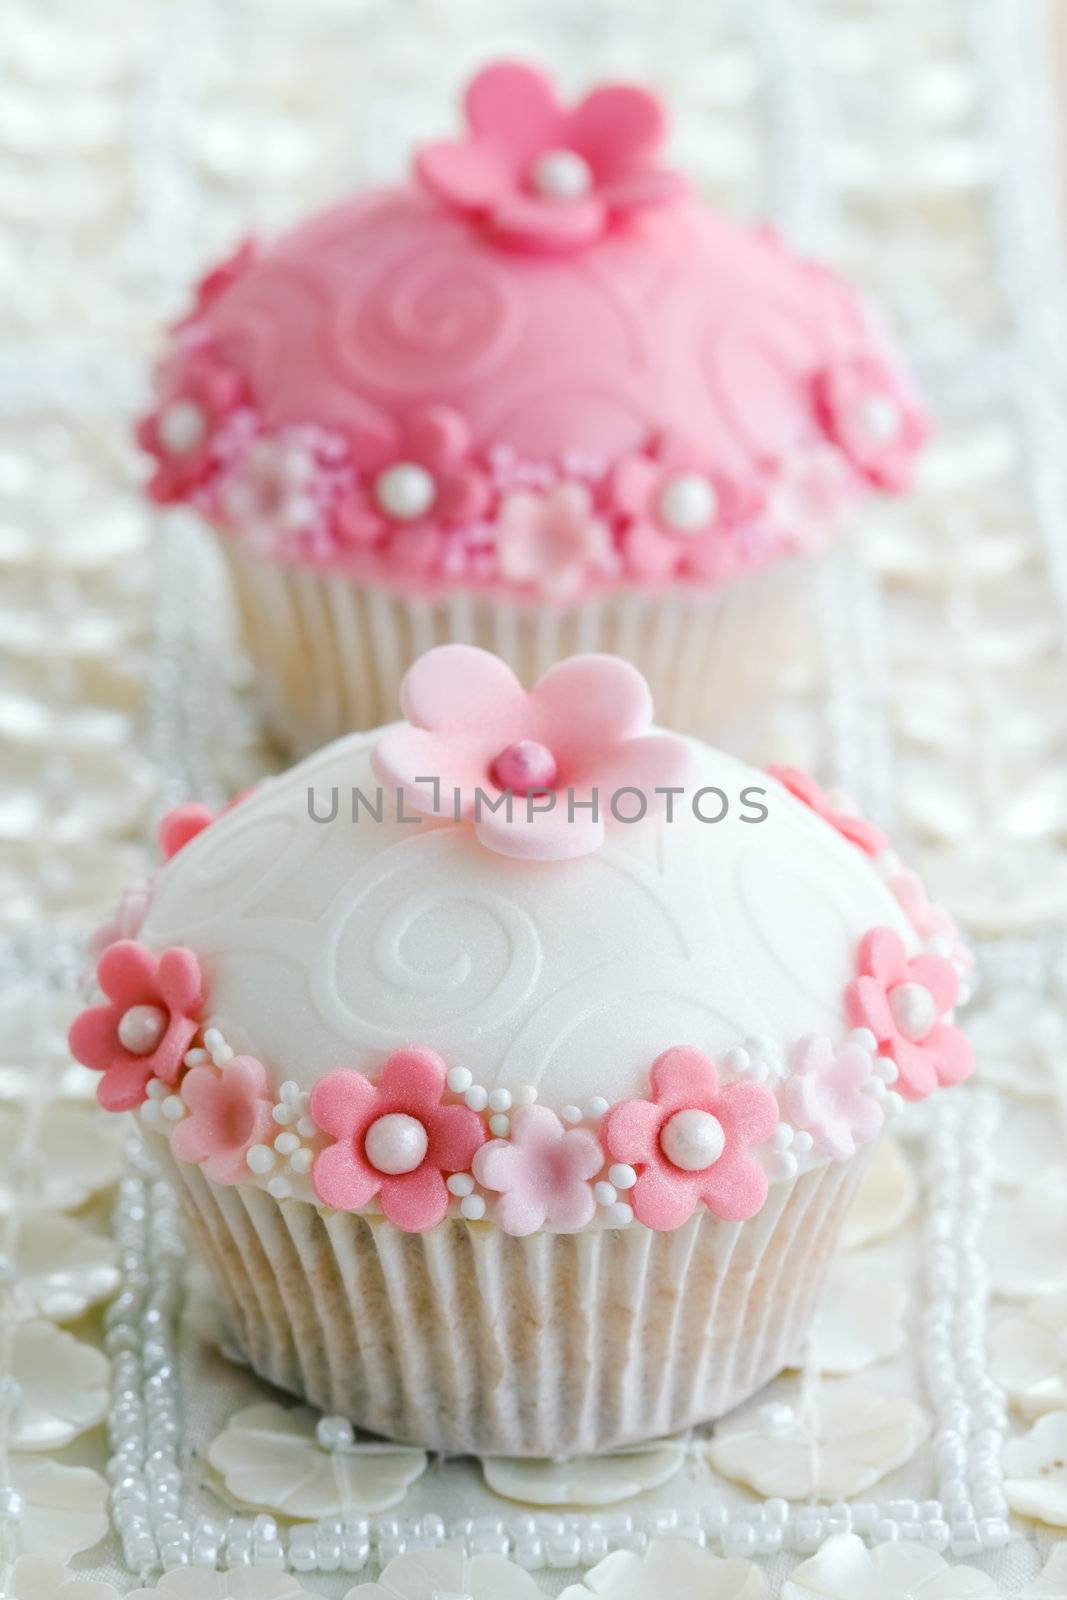 Wedding cupcakes decorated with a pink and white theme